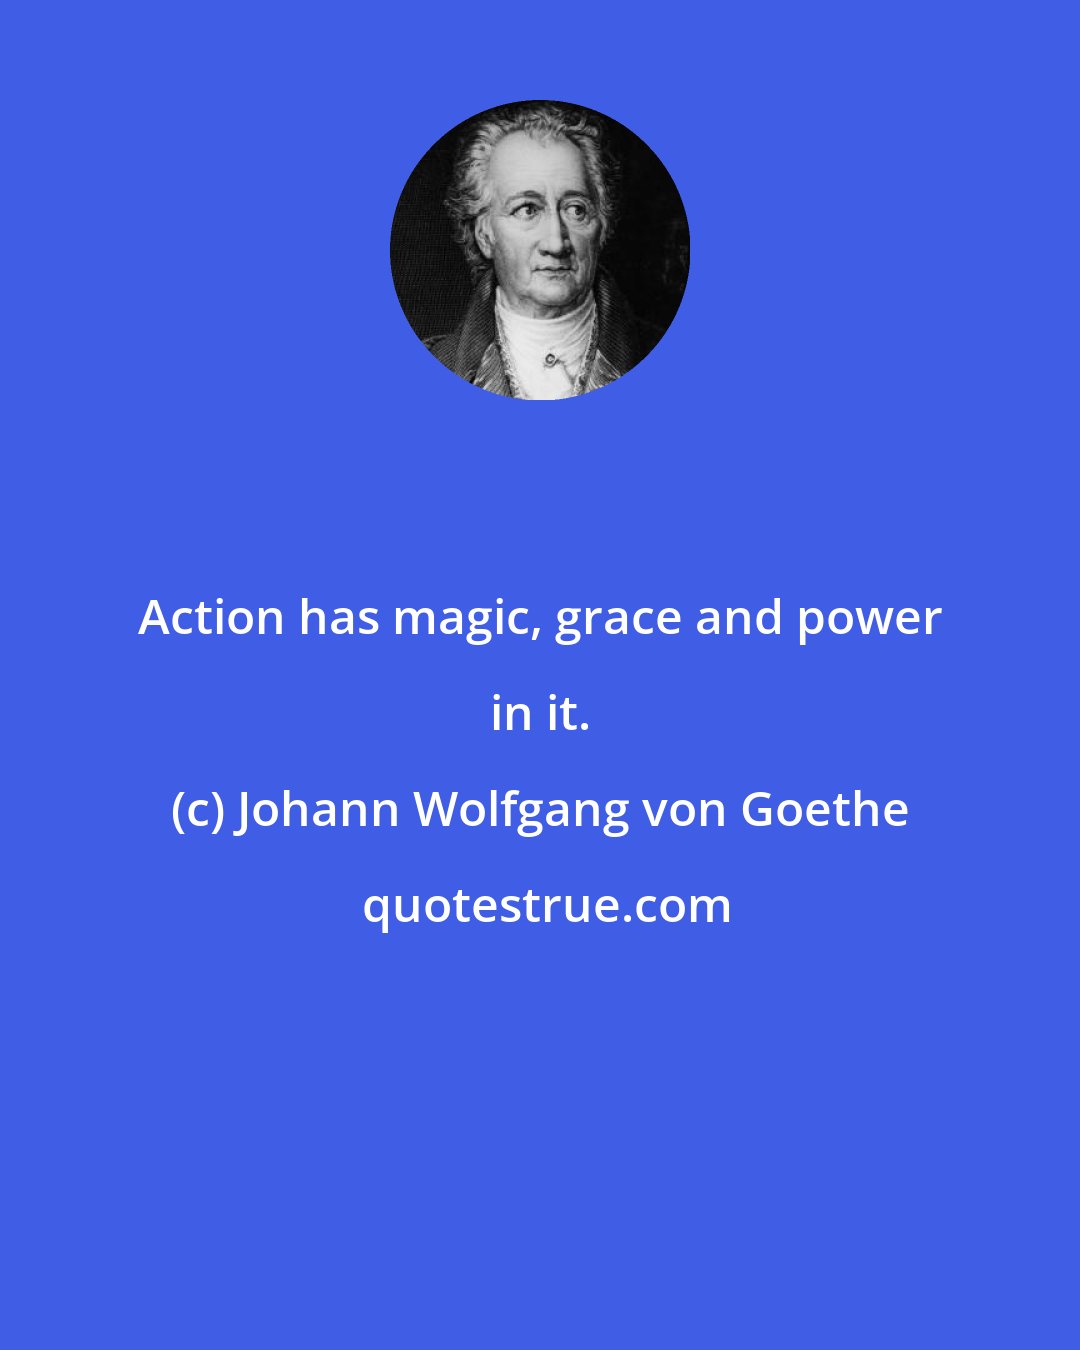 Johann Wolfgang von Goethe: Action has magic, grace and power in it.